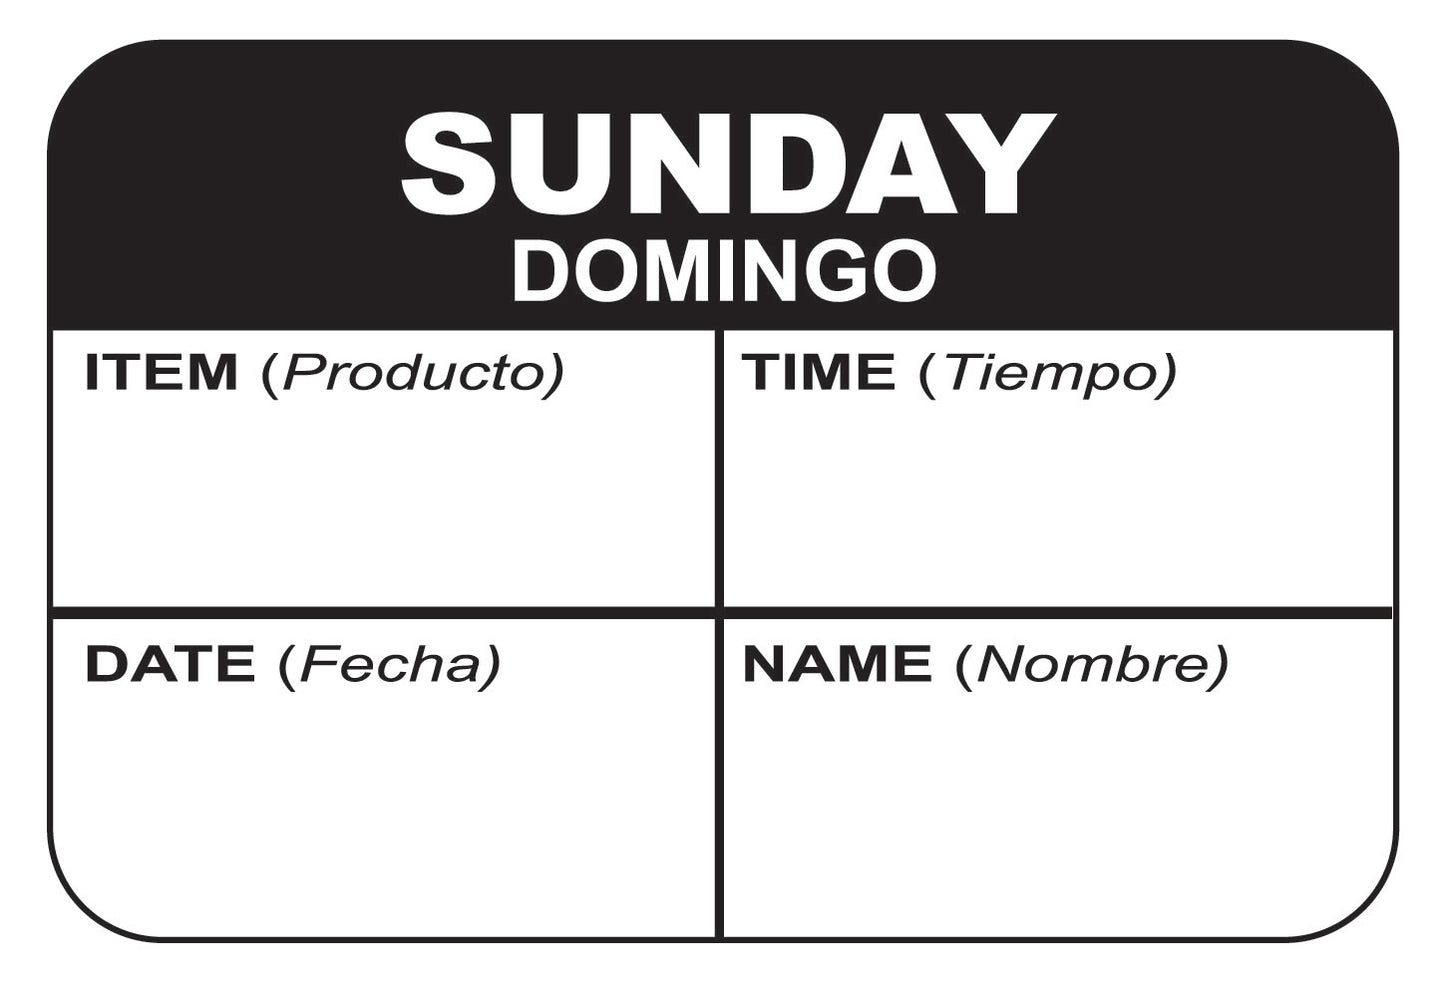 Sunday - Domingo 1" x 1.5" Dissolvable "Quad" Day of the Week Date Label